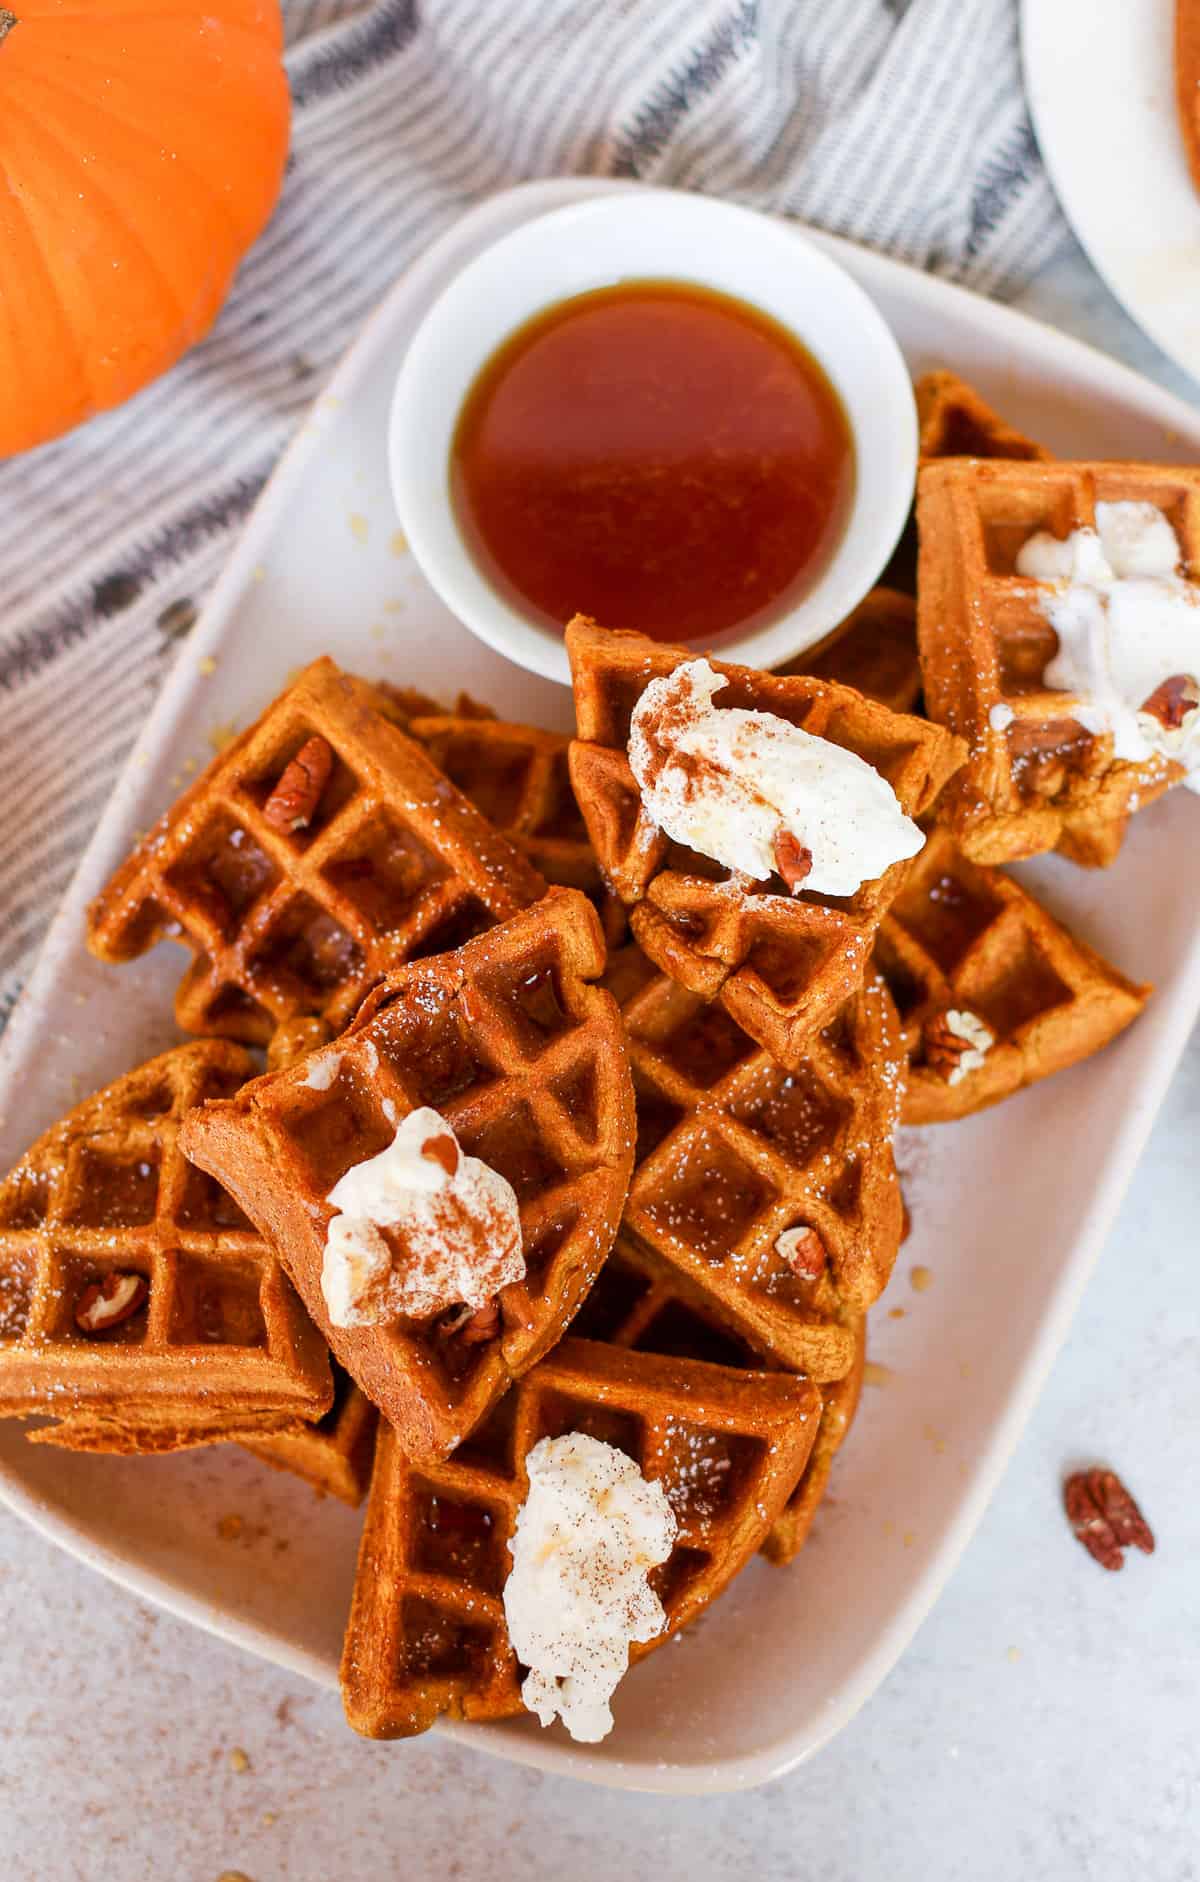  A platter of whole wheat pumpkin waffles with a few dollops of whip cream on top and a side of maple syrup.